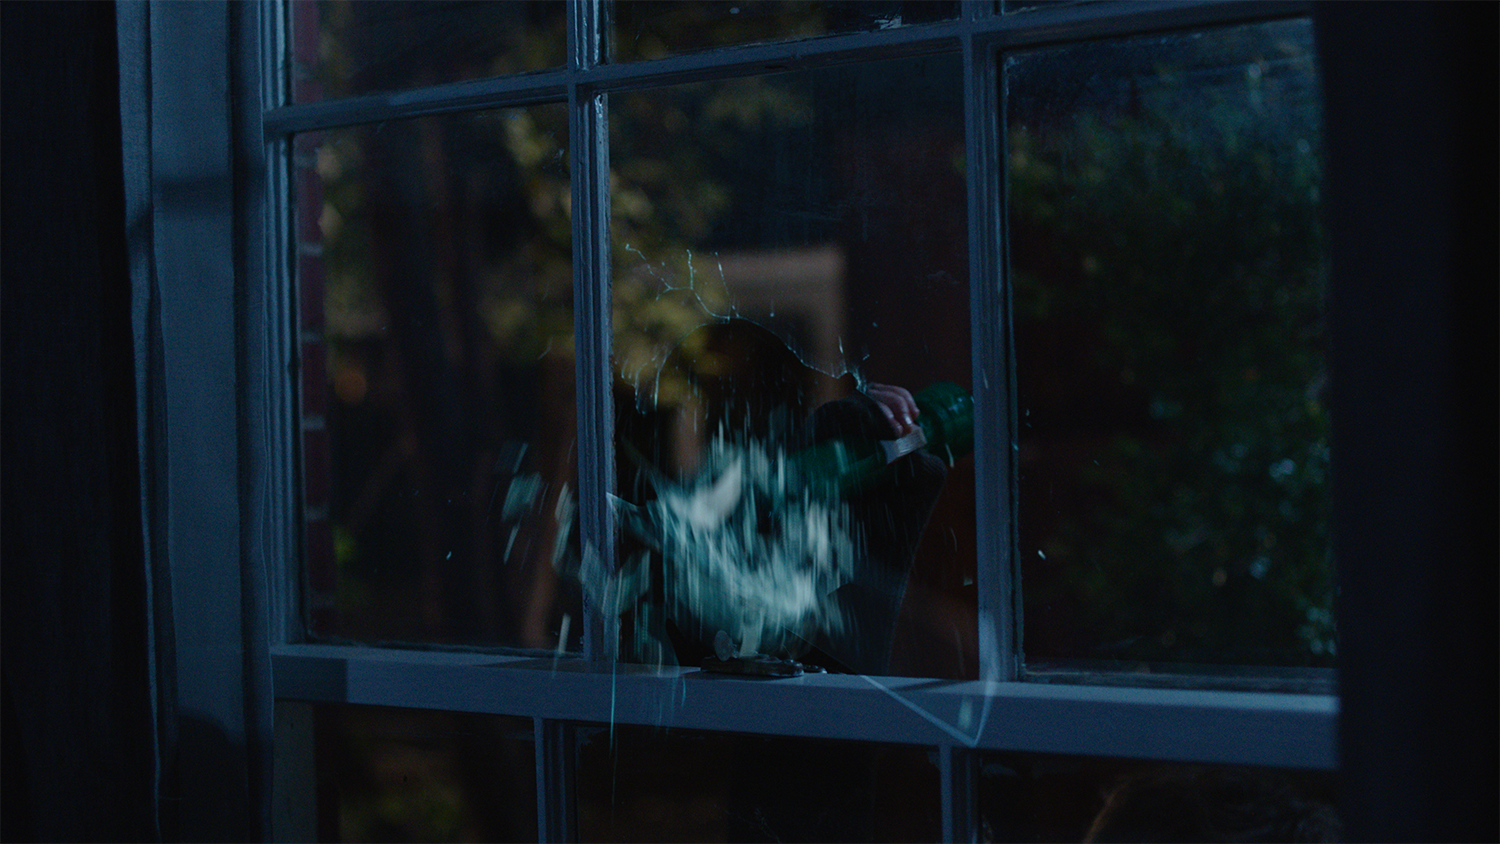 A flashlight is used to shatter a window in an episode of Cruel Summer, with VFX completed by Foxtrot X-Ray